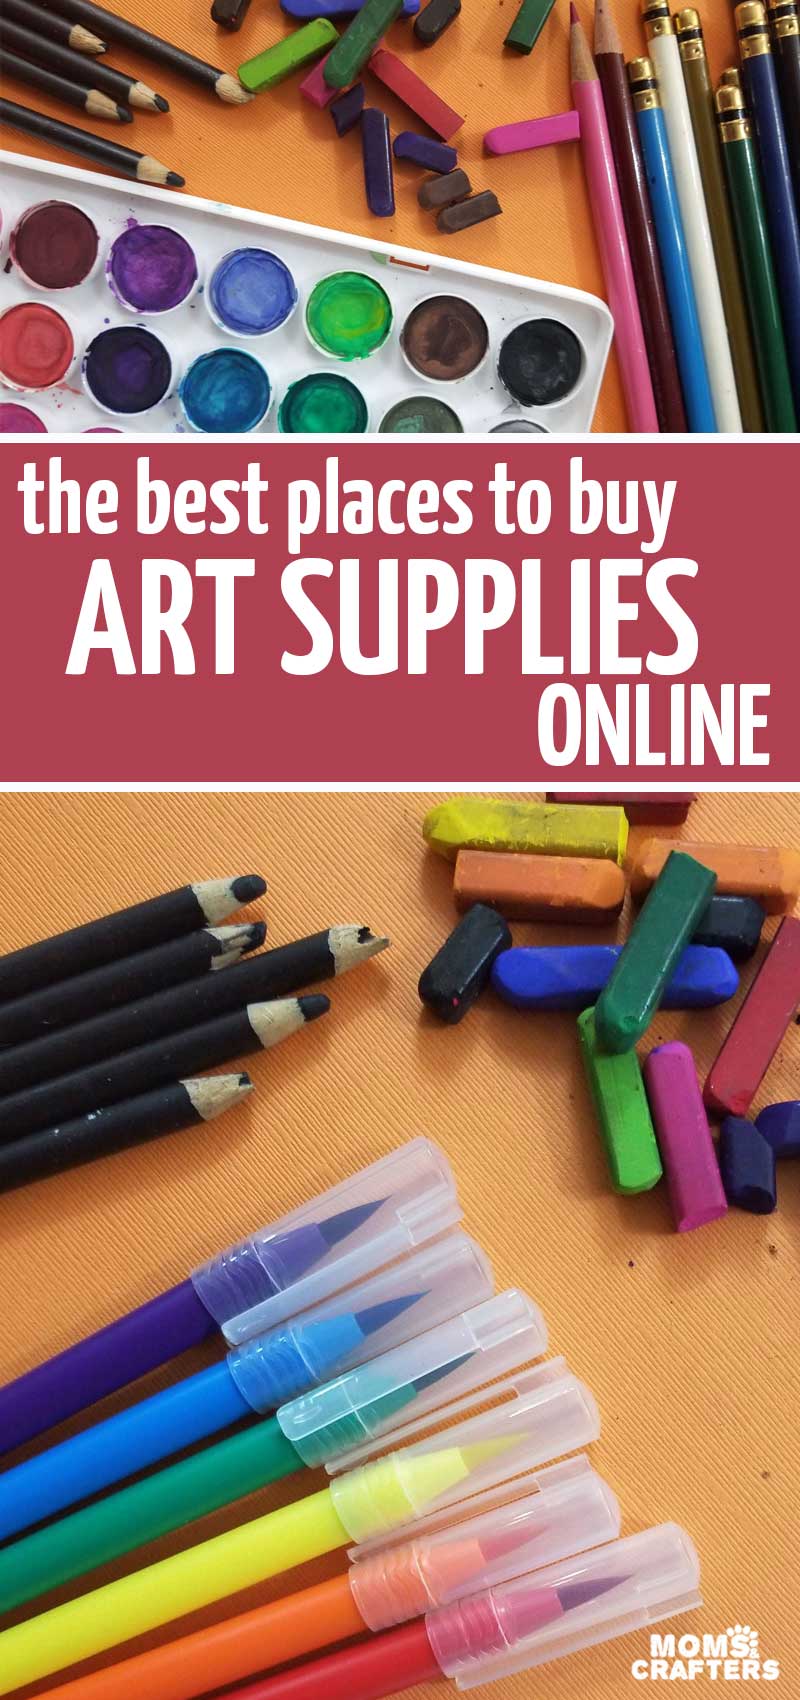 Ask the Expert: I'd like to know - Utrecht Art Supplies